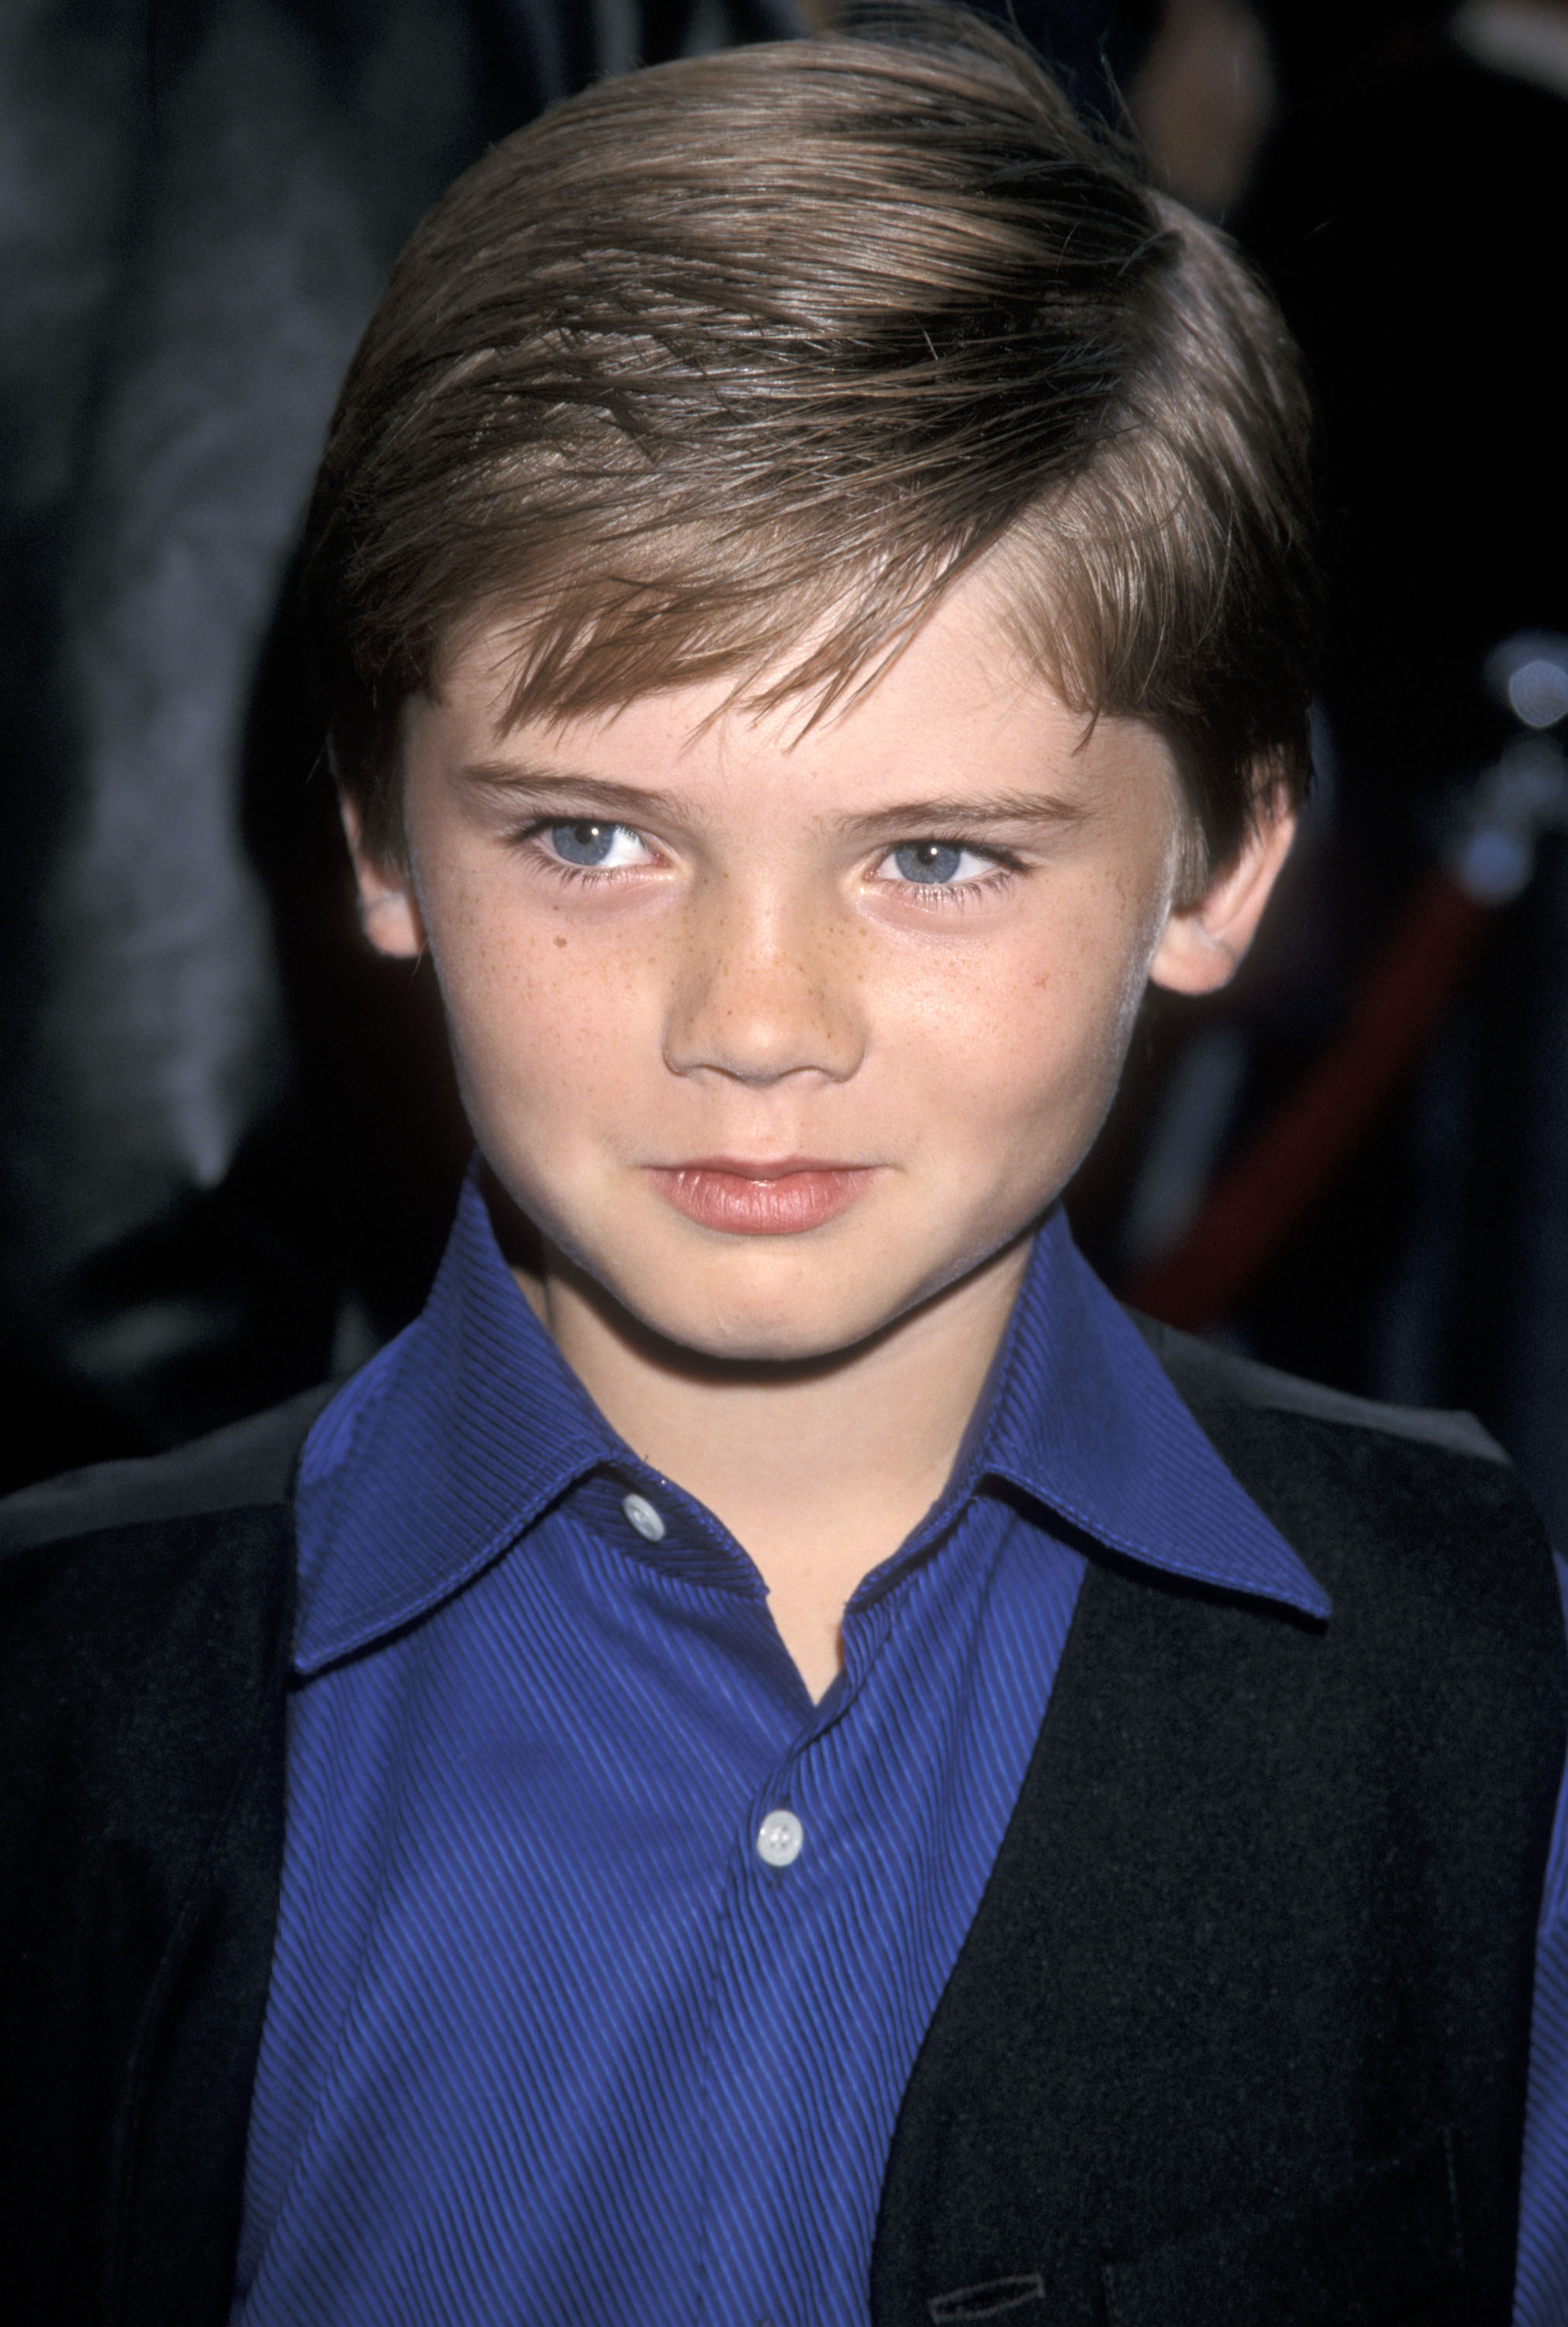 Actor Jake Lloyd attends The Hollywood Reporter's 3rd Annual YoungStar Awards on November 8, 1998 | Source: Getty Images